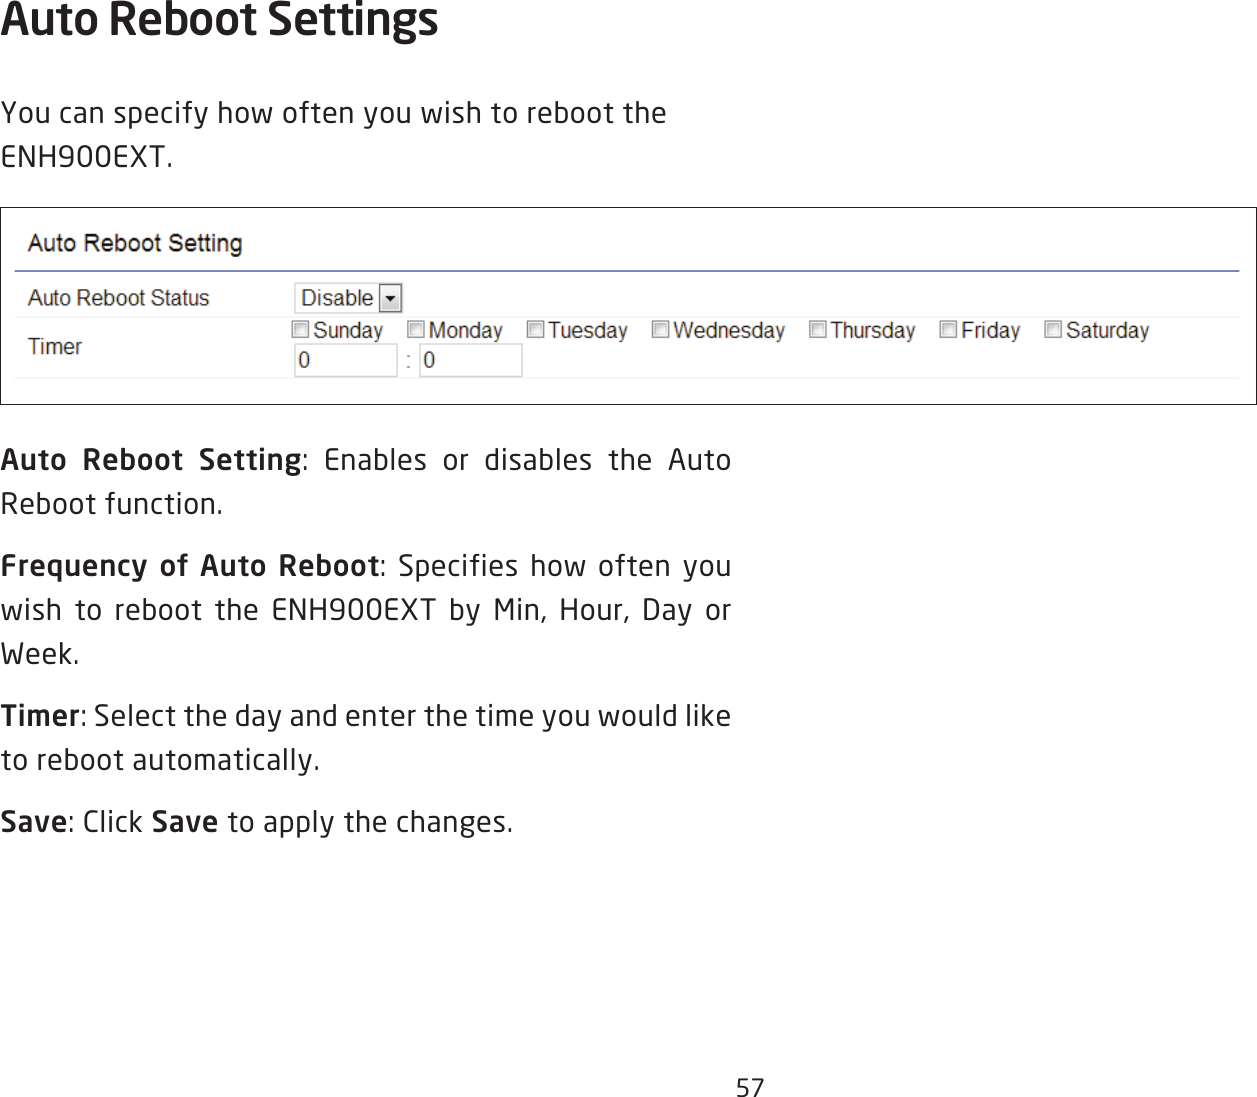 57Auto Reboot Settings You can specify how often you wish to reboot the ENH900EXT.Auto Reboot Setting: Enables or disables the Auto Reboot function.Frequency  of  Auto  Reboot: Specifies how often you wish to reboot the ENH900EXT by Min, Hour, Day or Week.Timer: Select the day and enter the time you would like to reboot automatically.Save: Click Save to apply the changes.